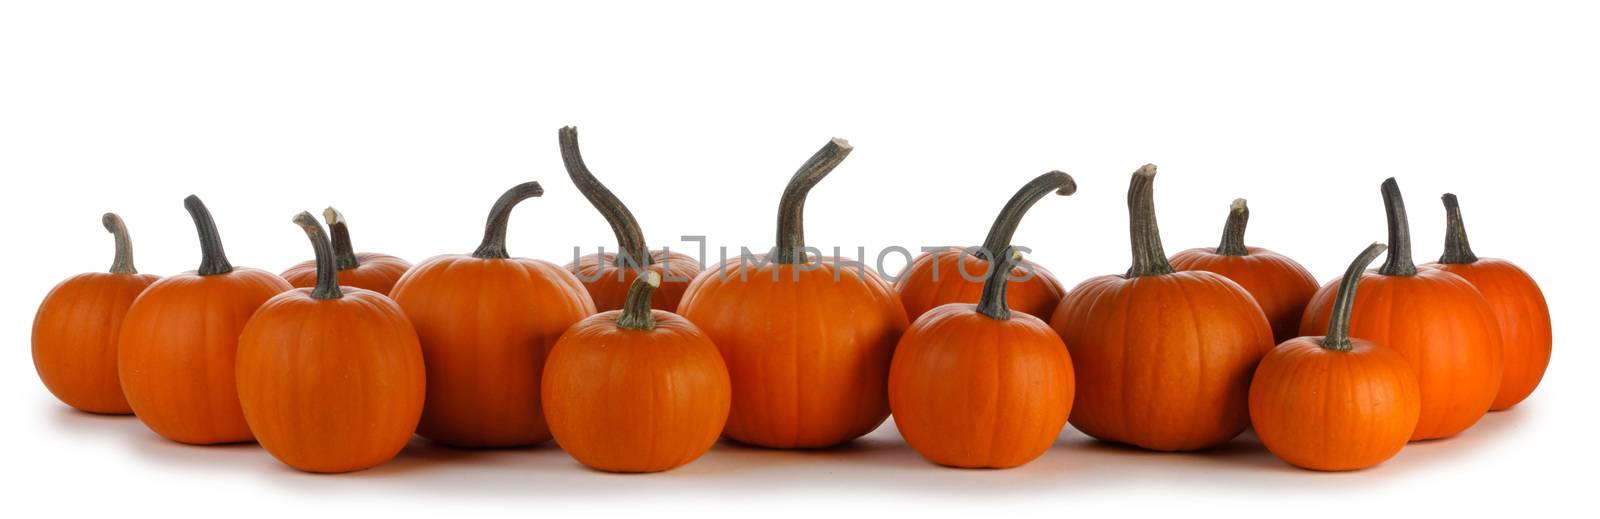 Autumn border of pumpkins in a row isolated on white background